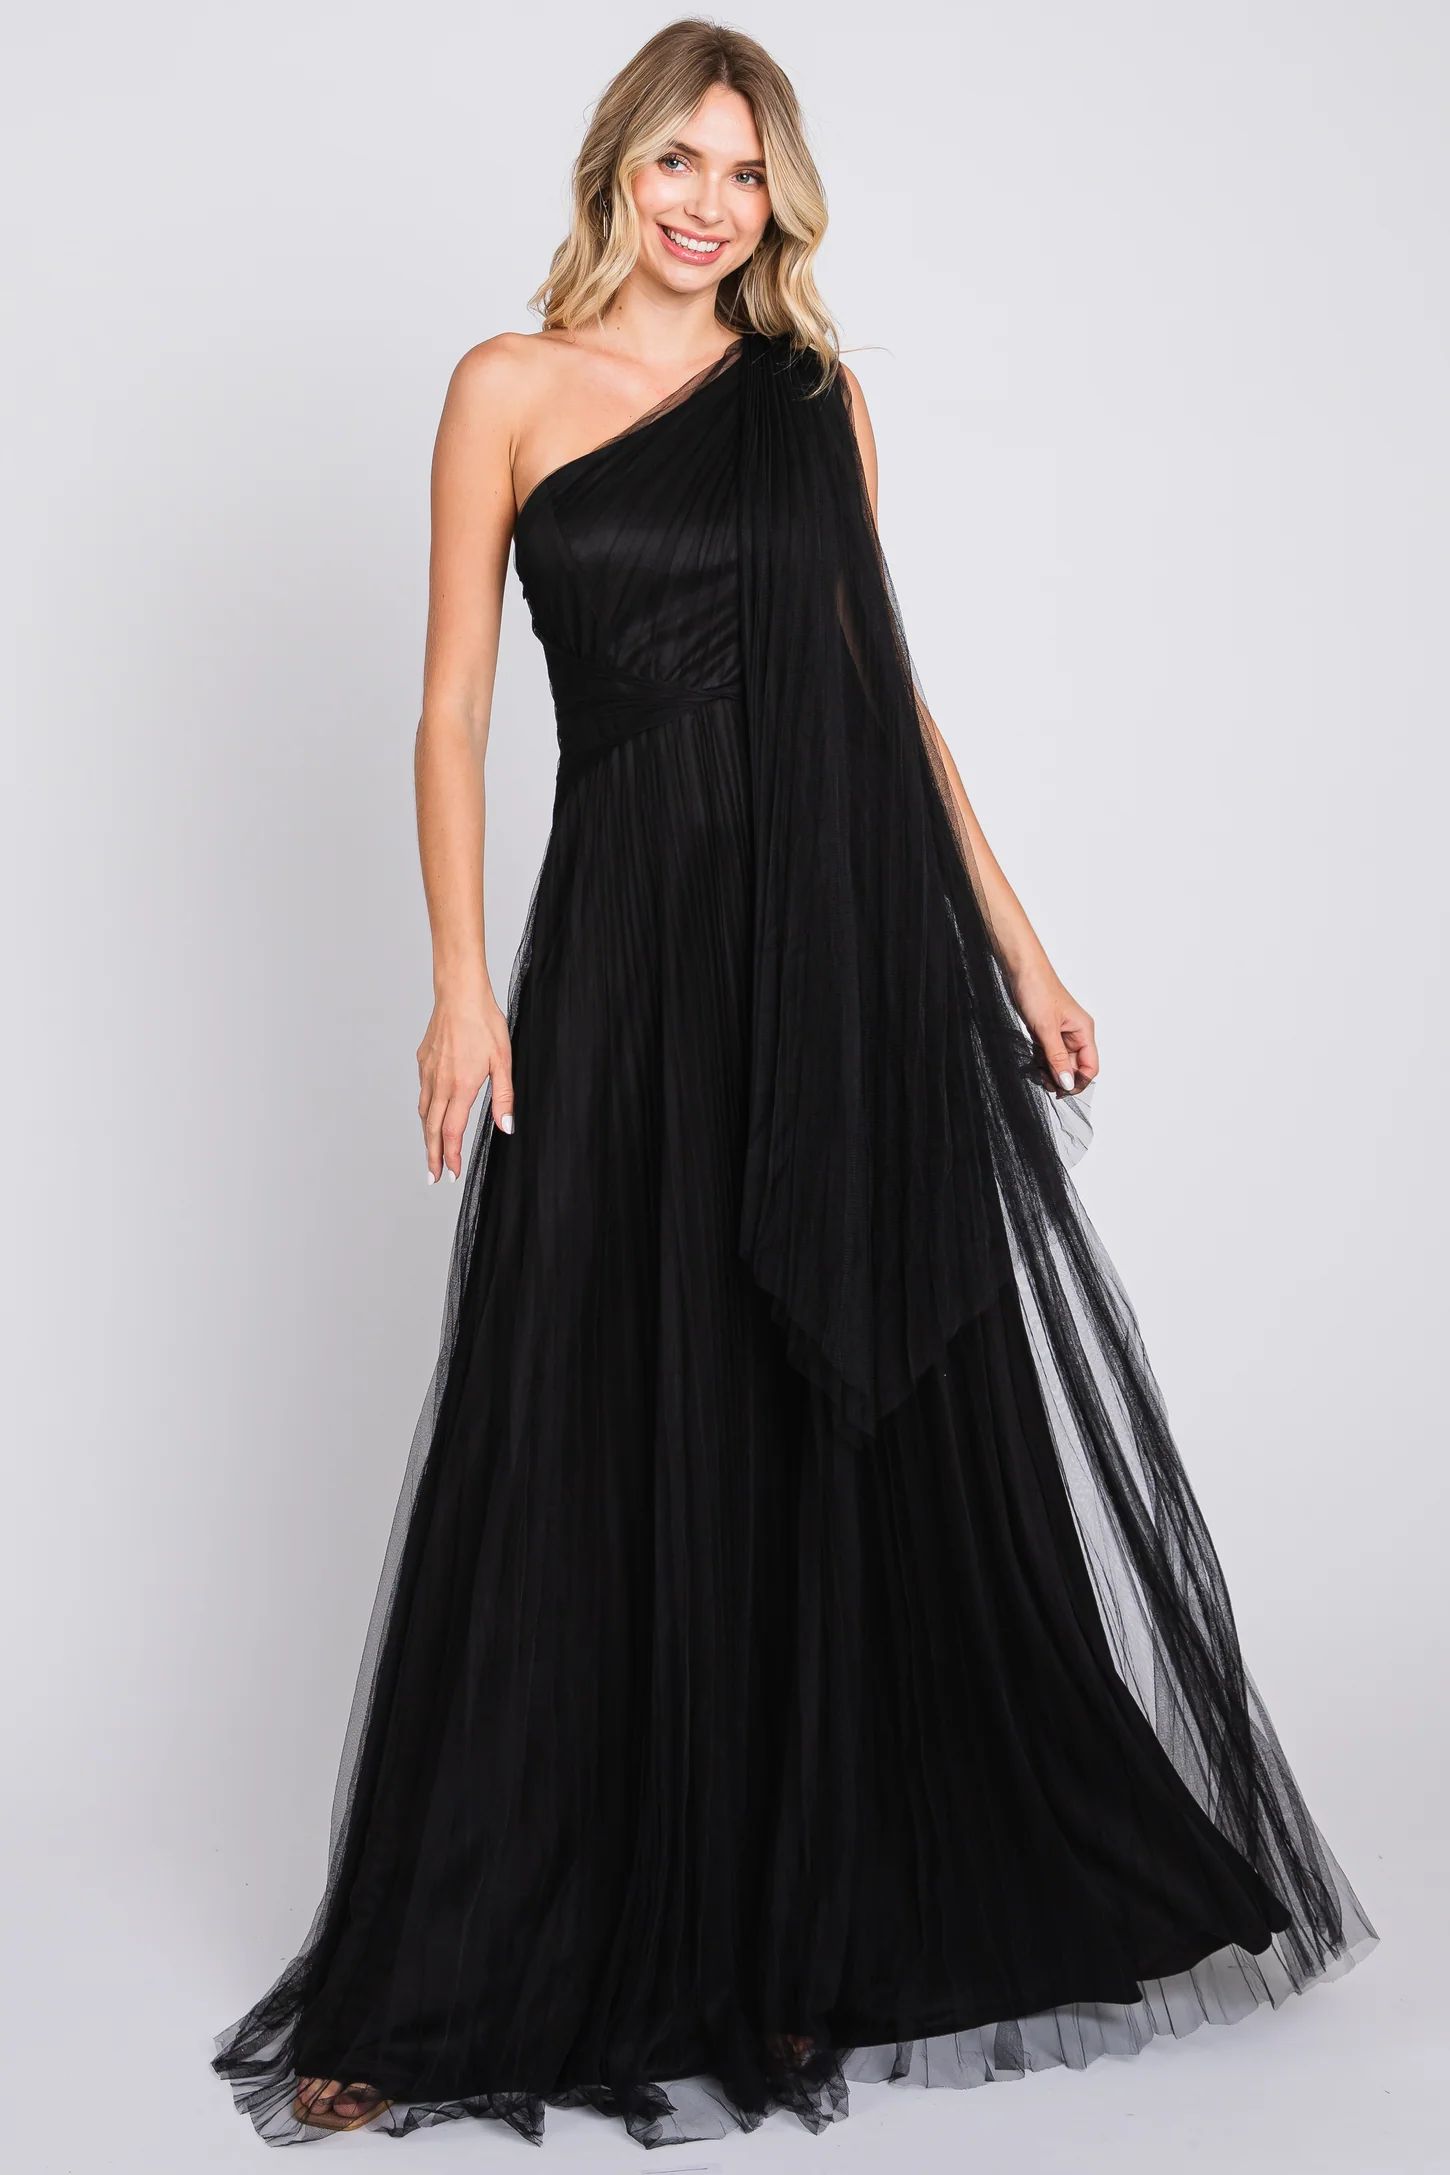 Black One Shoulder Pleated Mesh Maternity Gown | PinkBlush Maternity